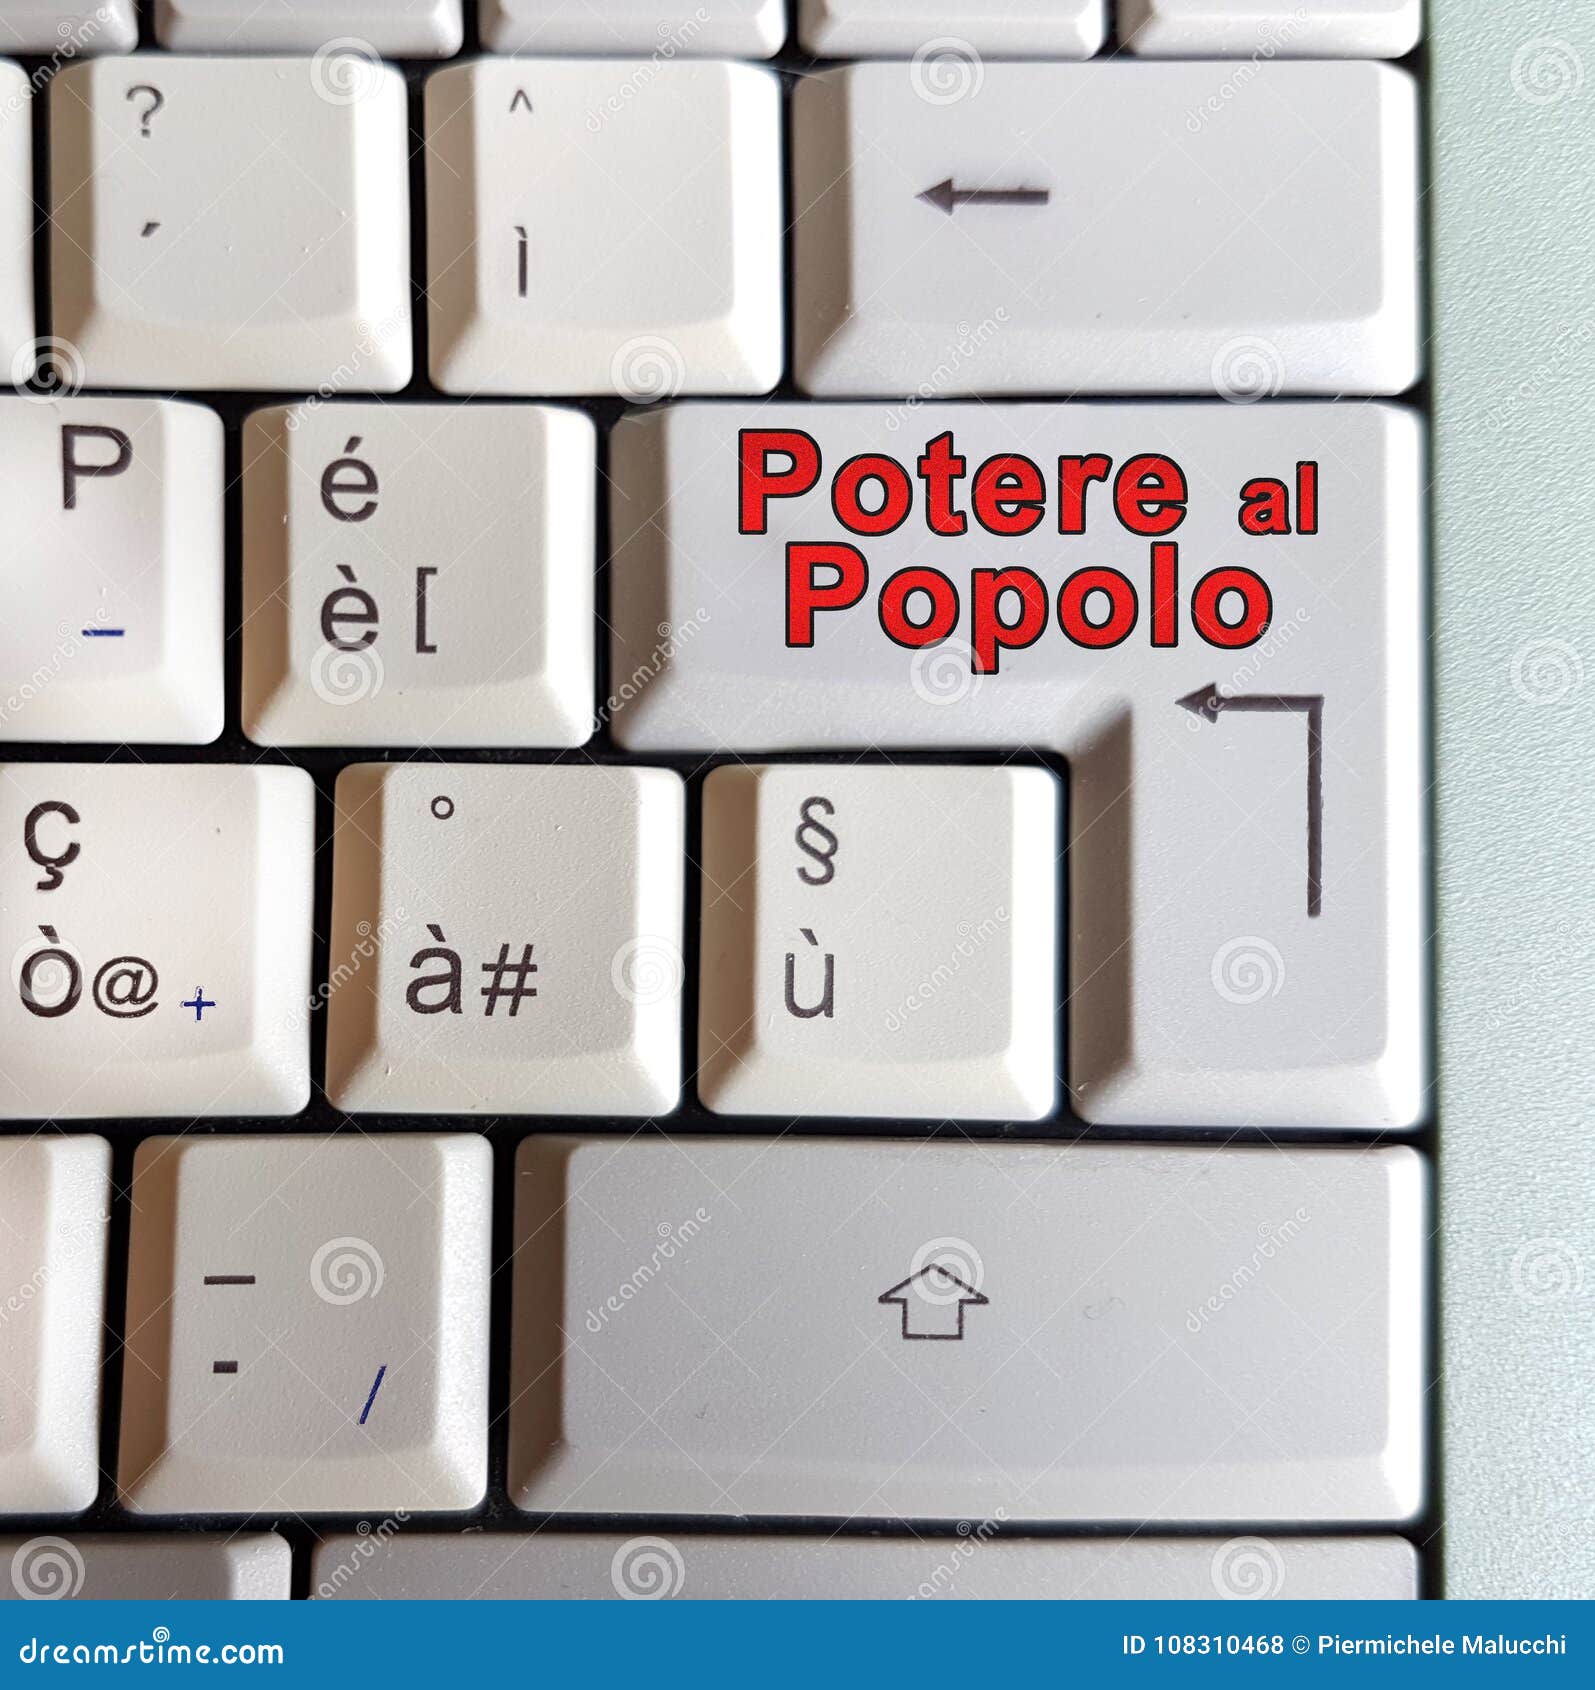 with the keyboard vote for the next elections in italy, vote pot